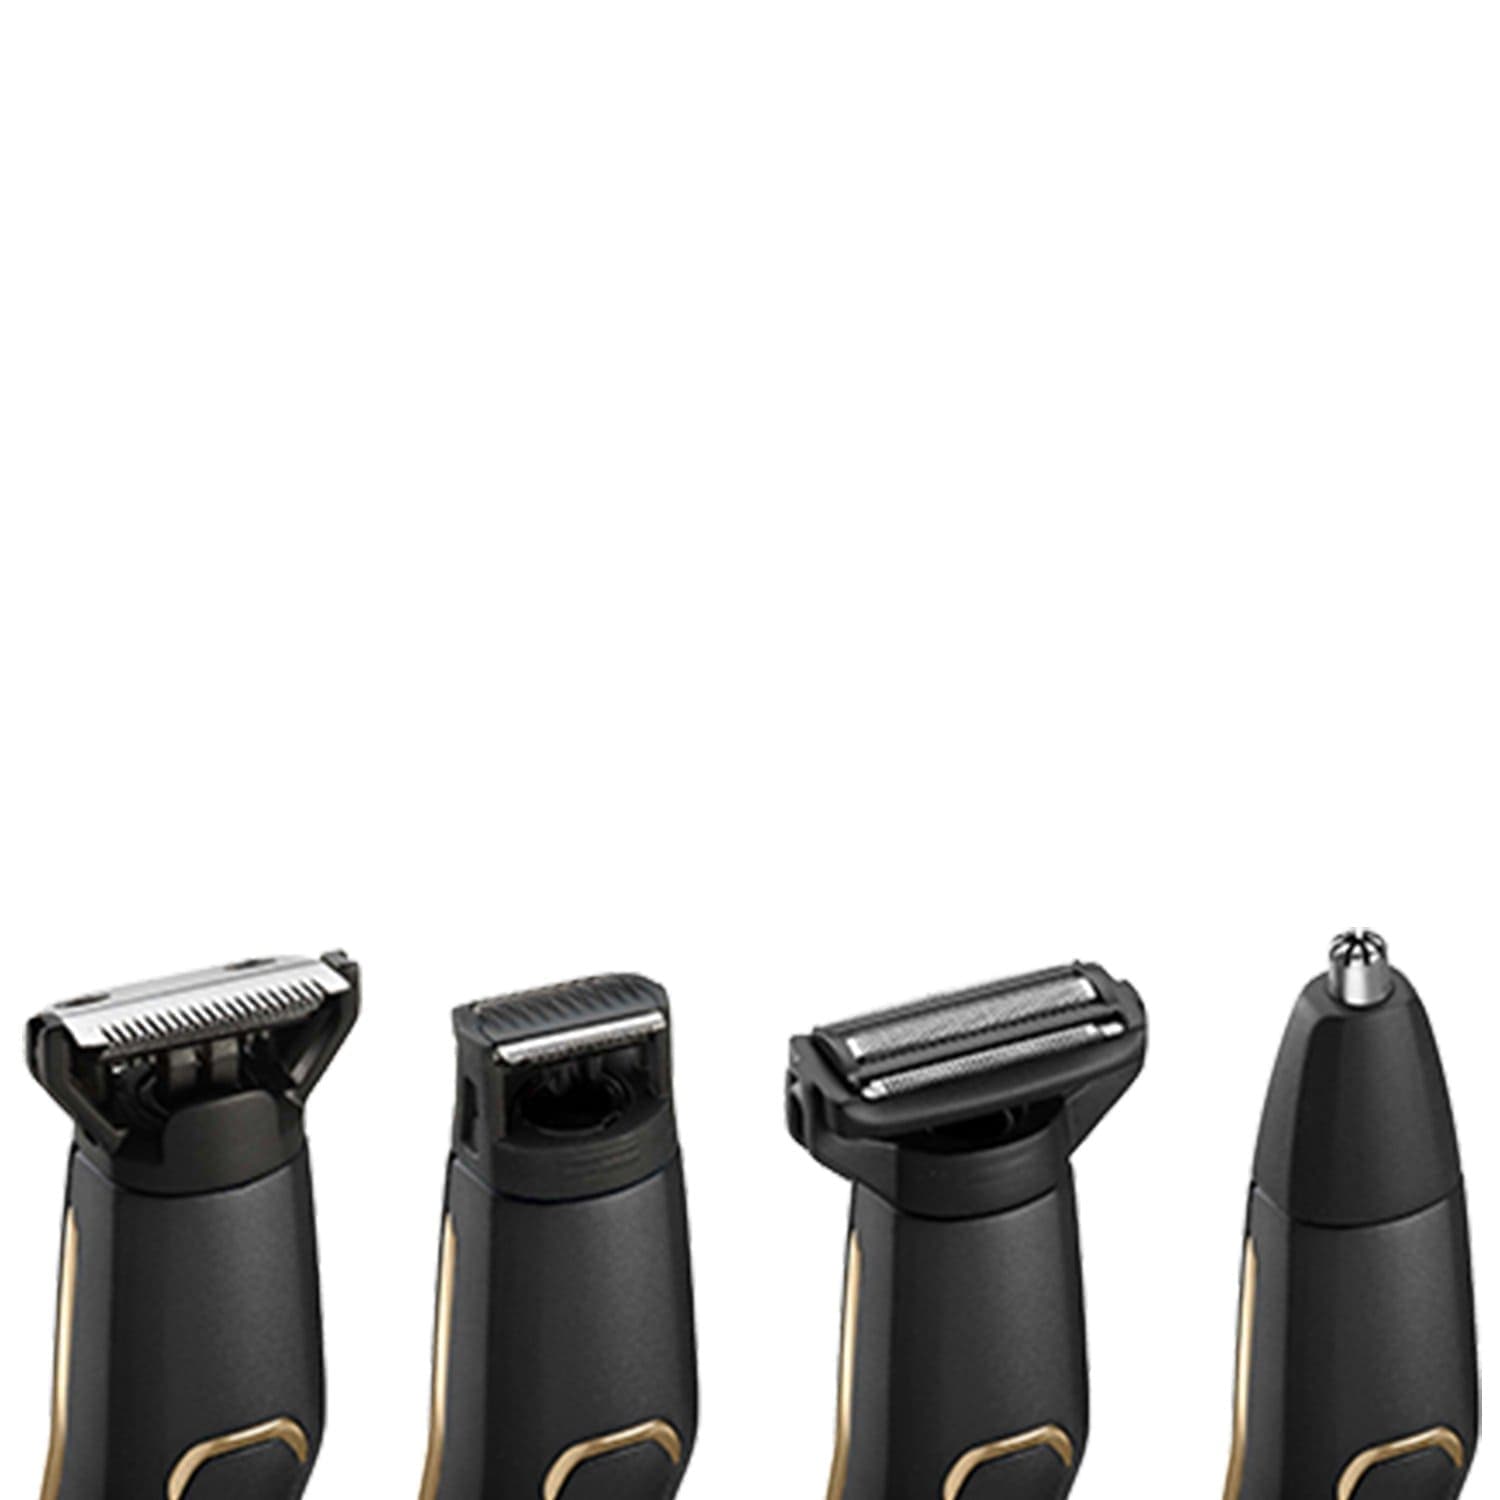 BaByliss 11 in 1 Waterproof Carbon Titanium Multi Trimmer Kit